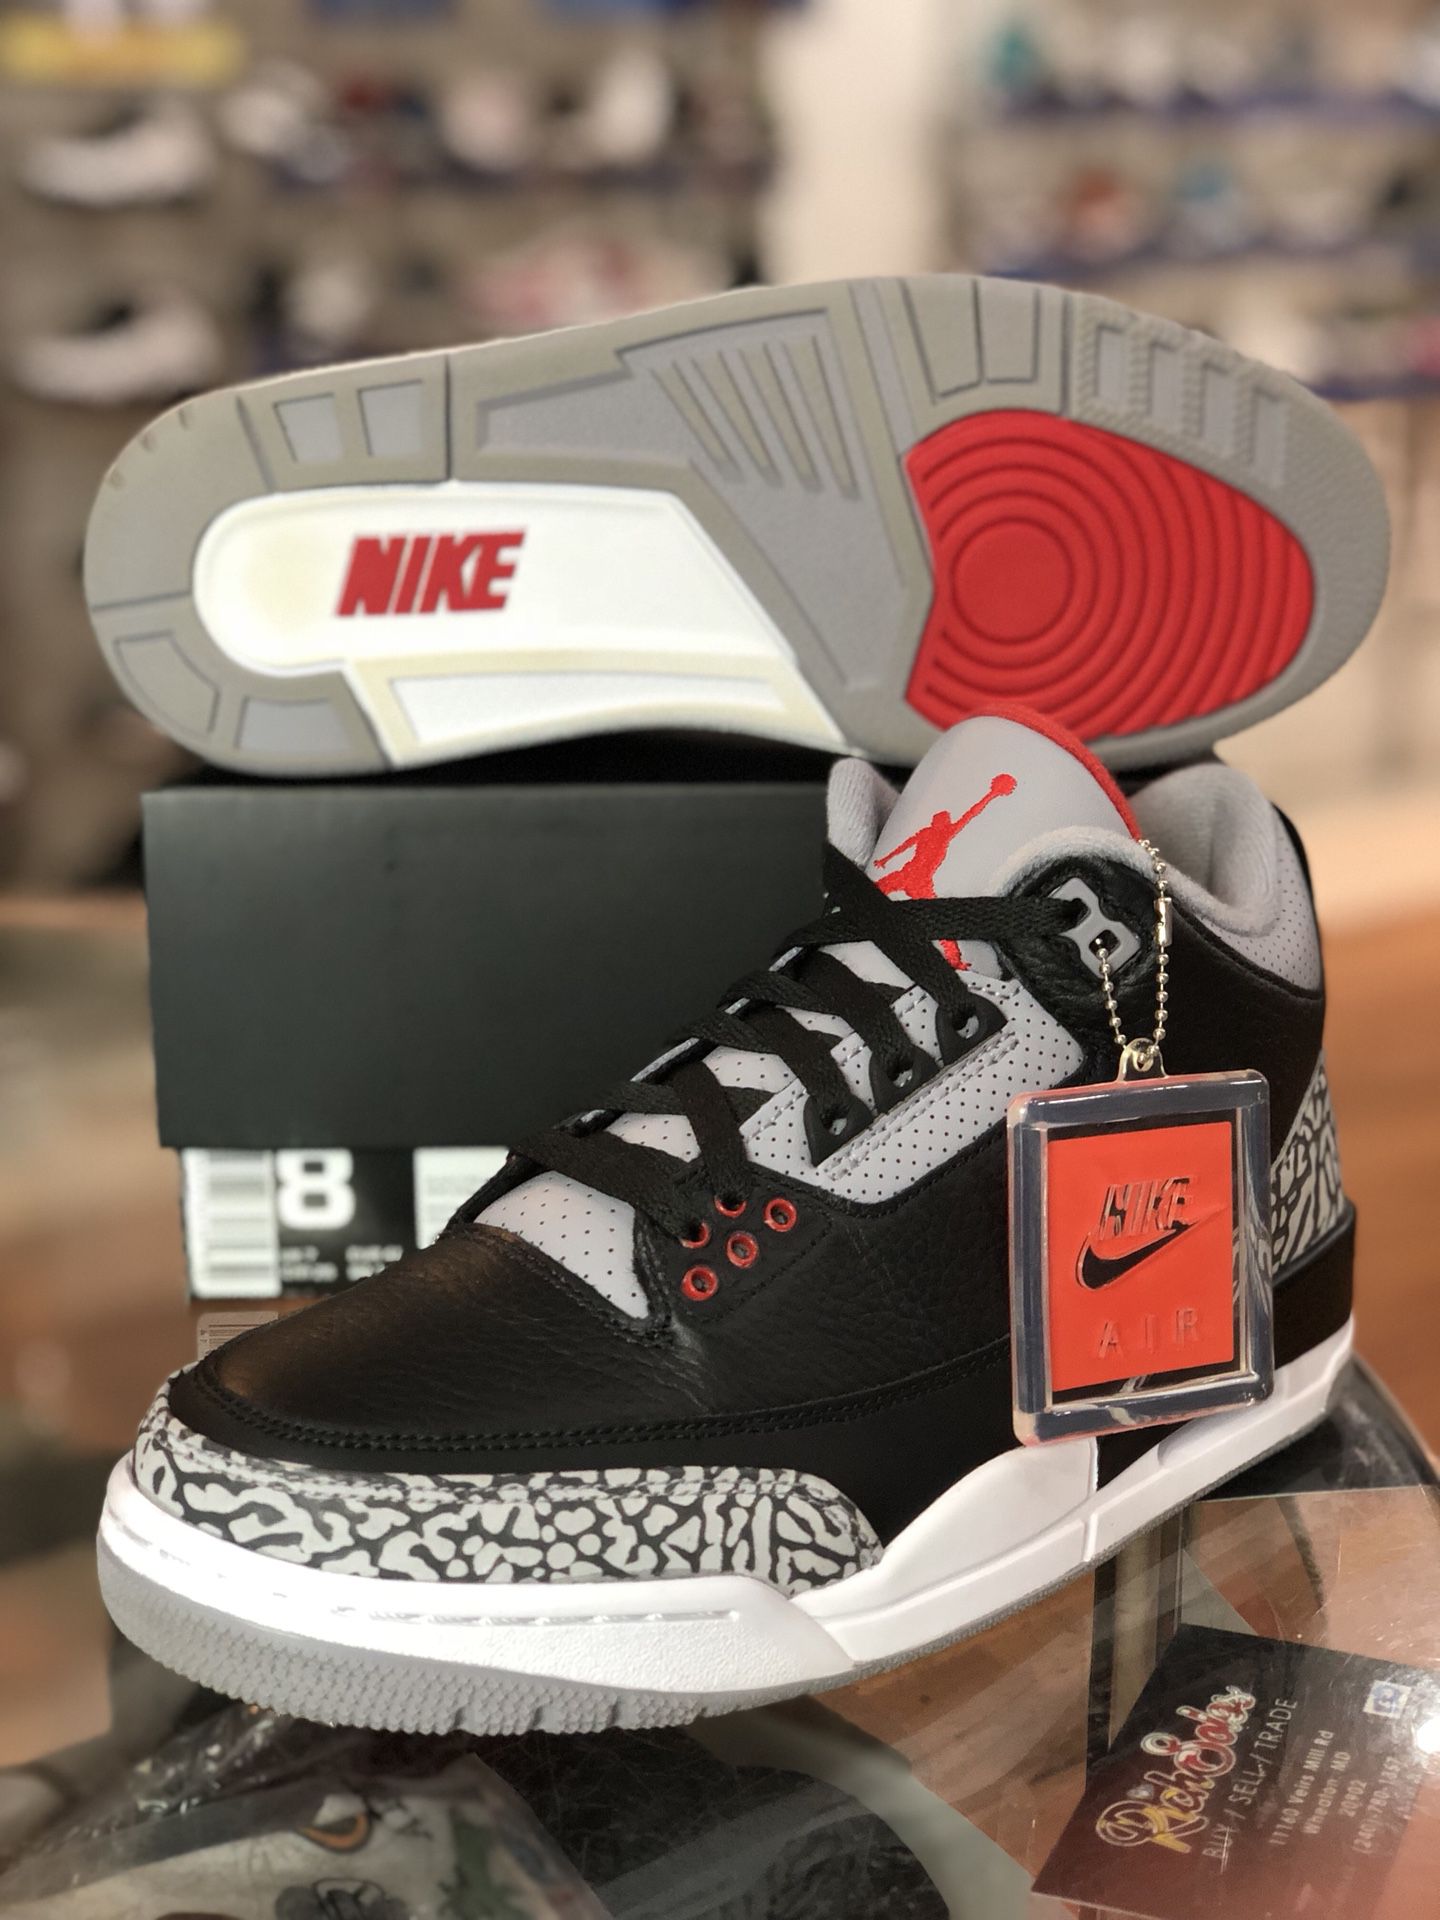 Nike air black cement 3s size 8